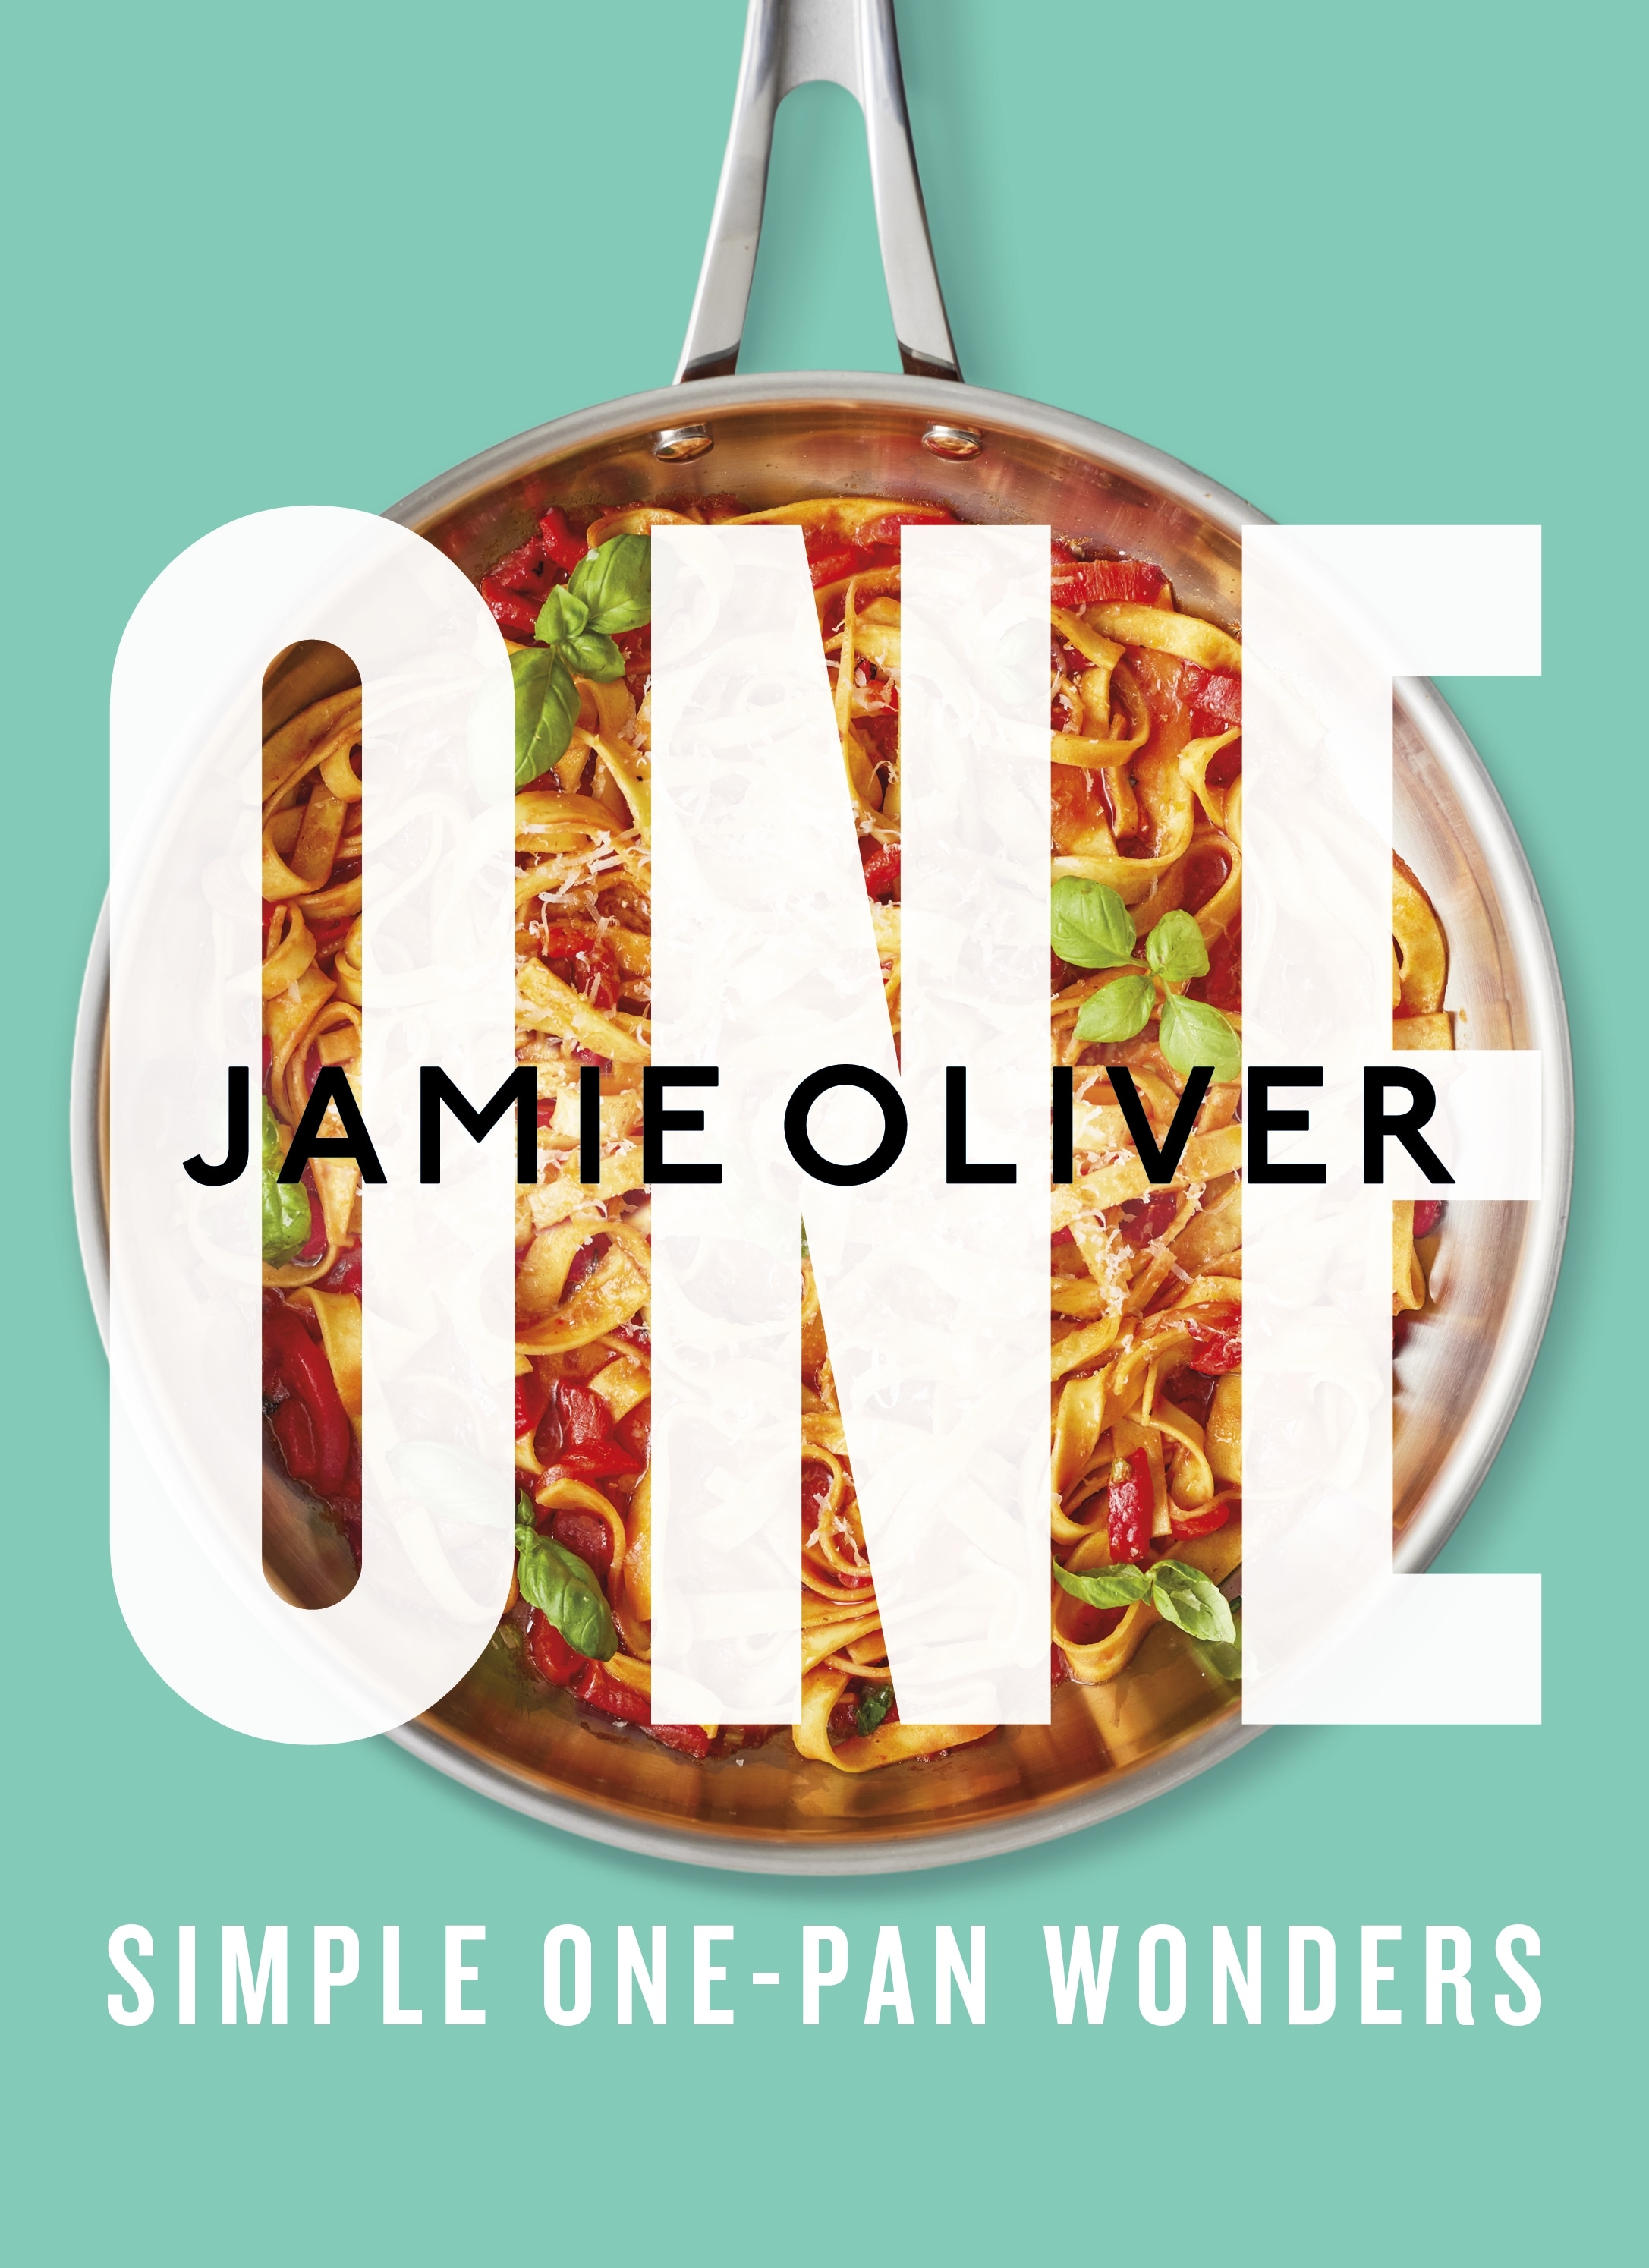 Book “One” by Jamie Oliver — September 1, 2022